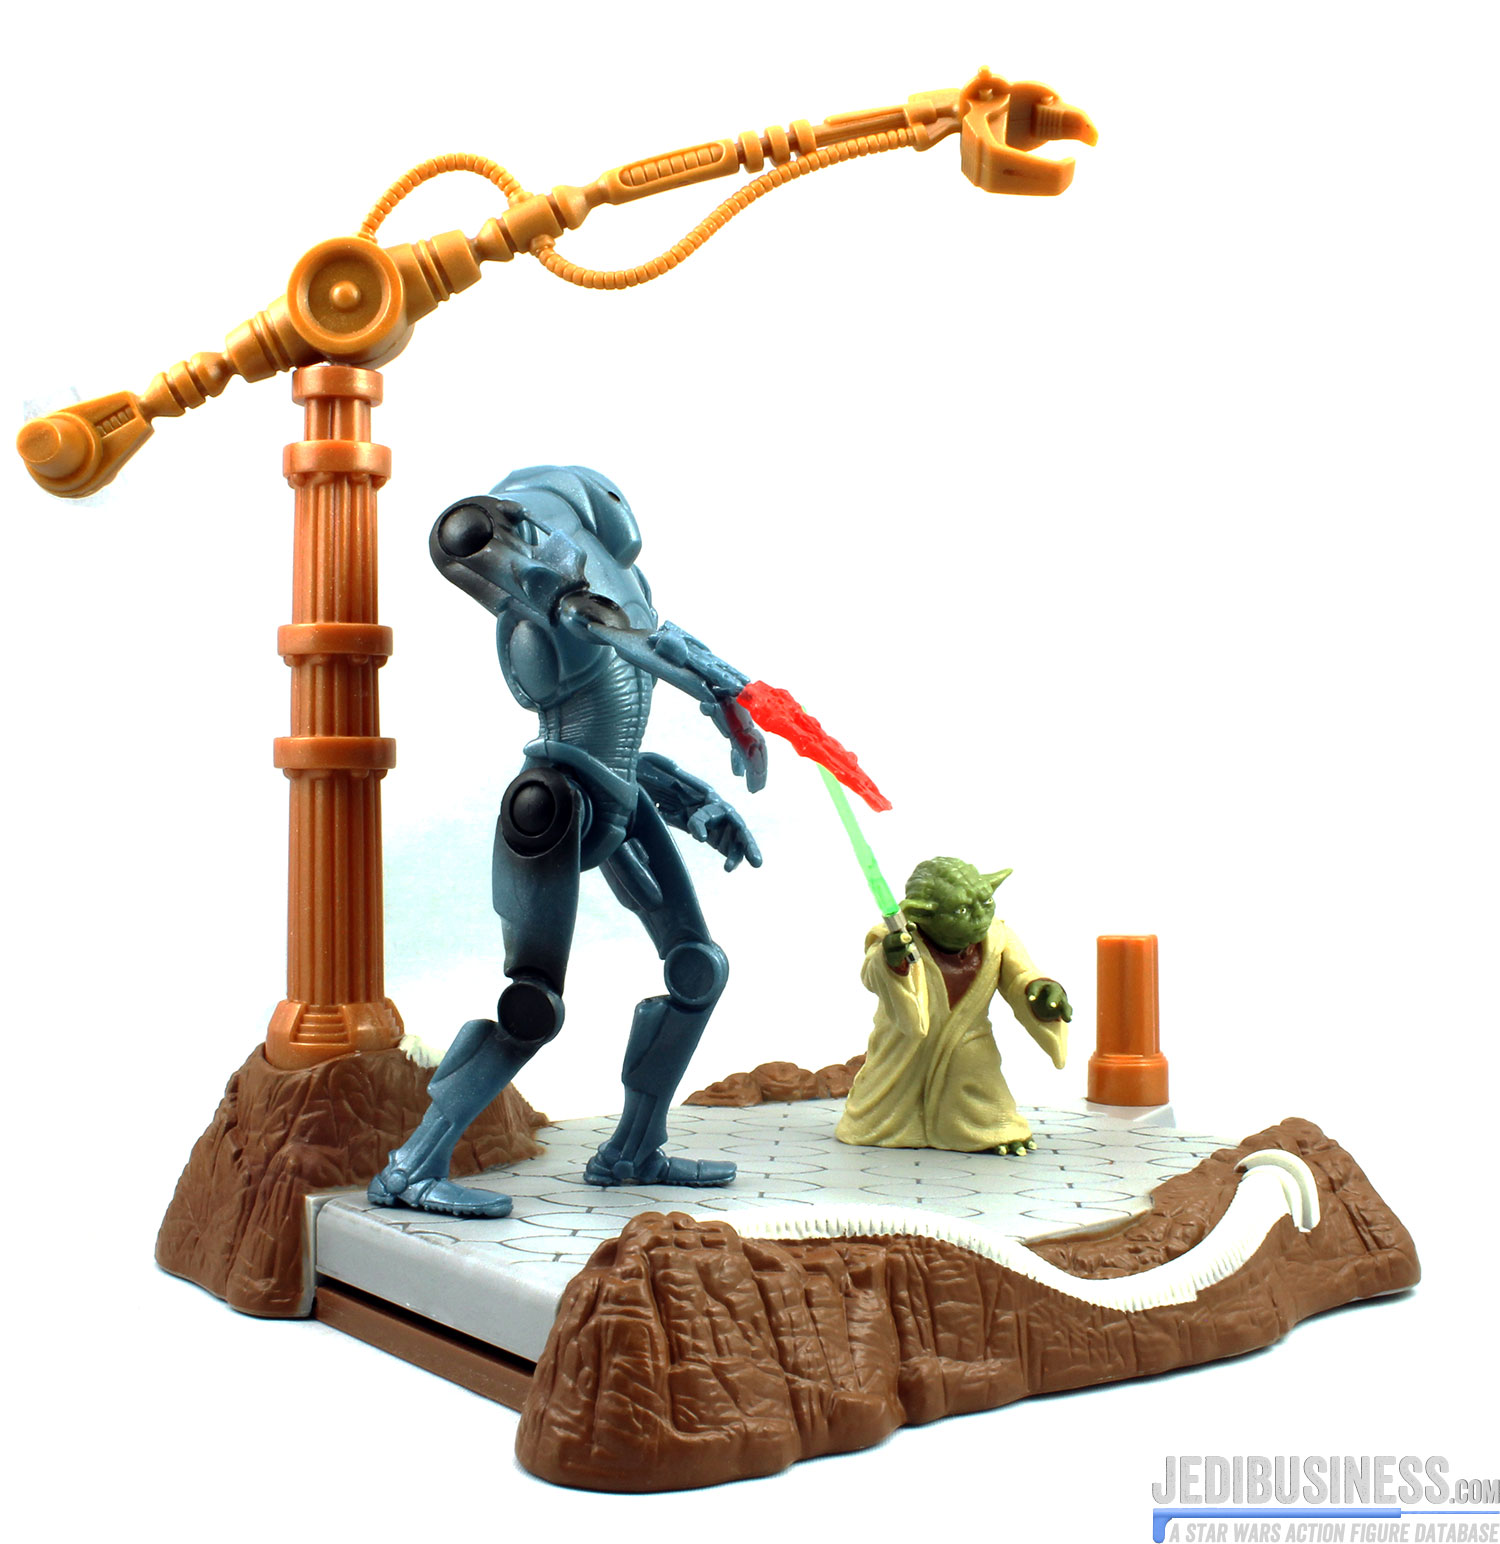 Yoda With Force Powers 2-Pack